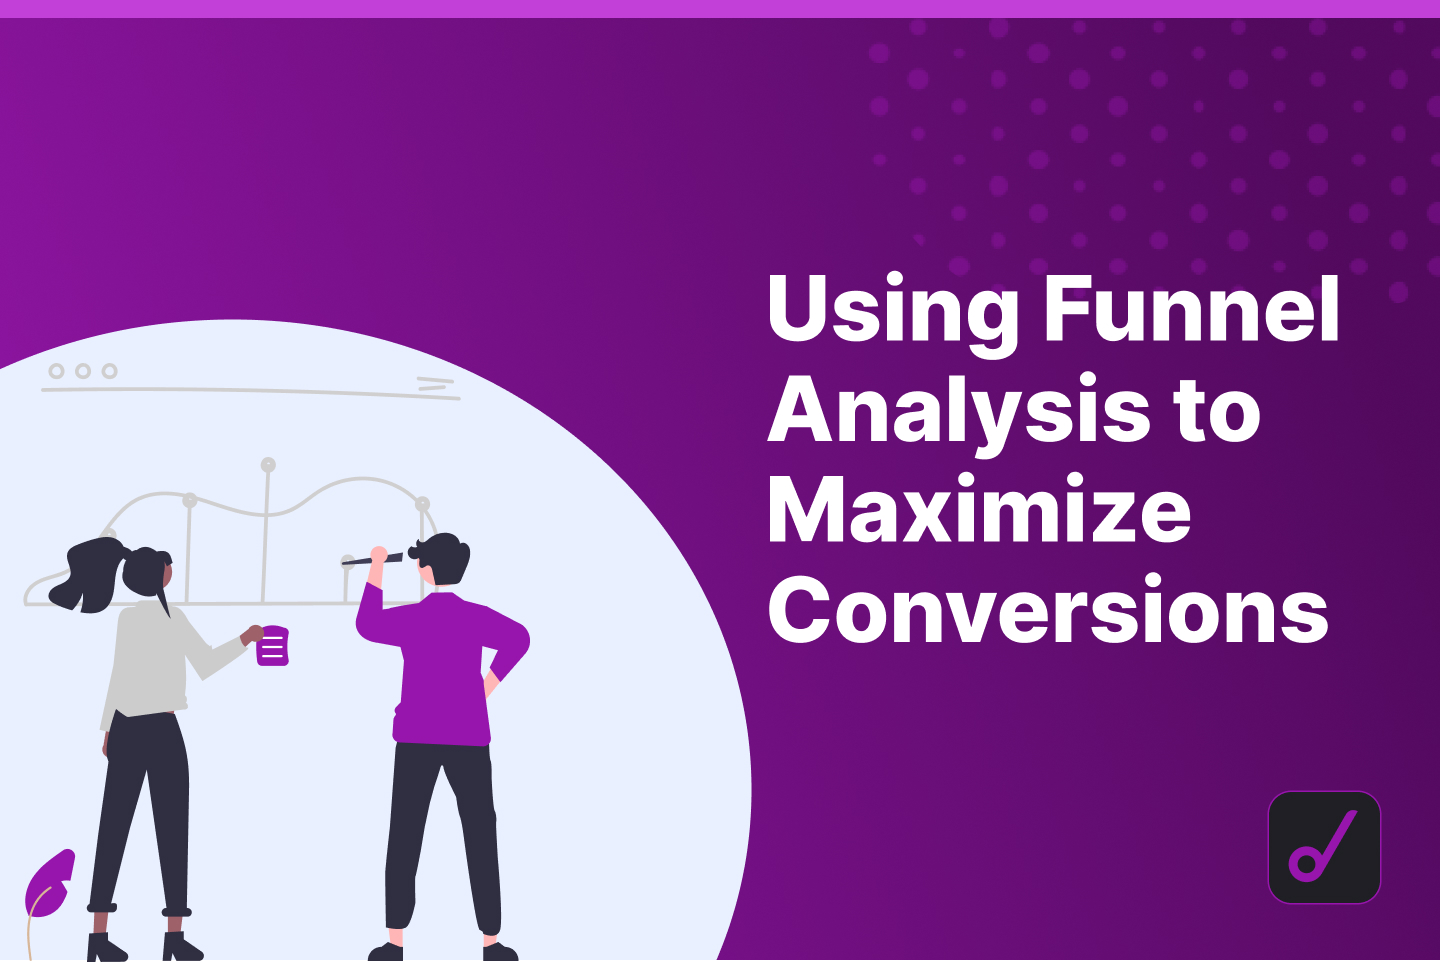 Improving Conversions through Funnel Analysis